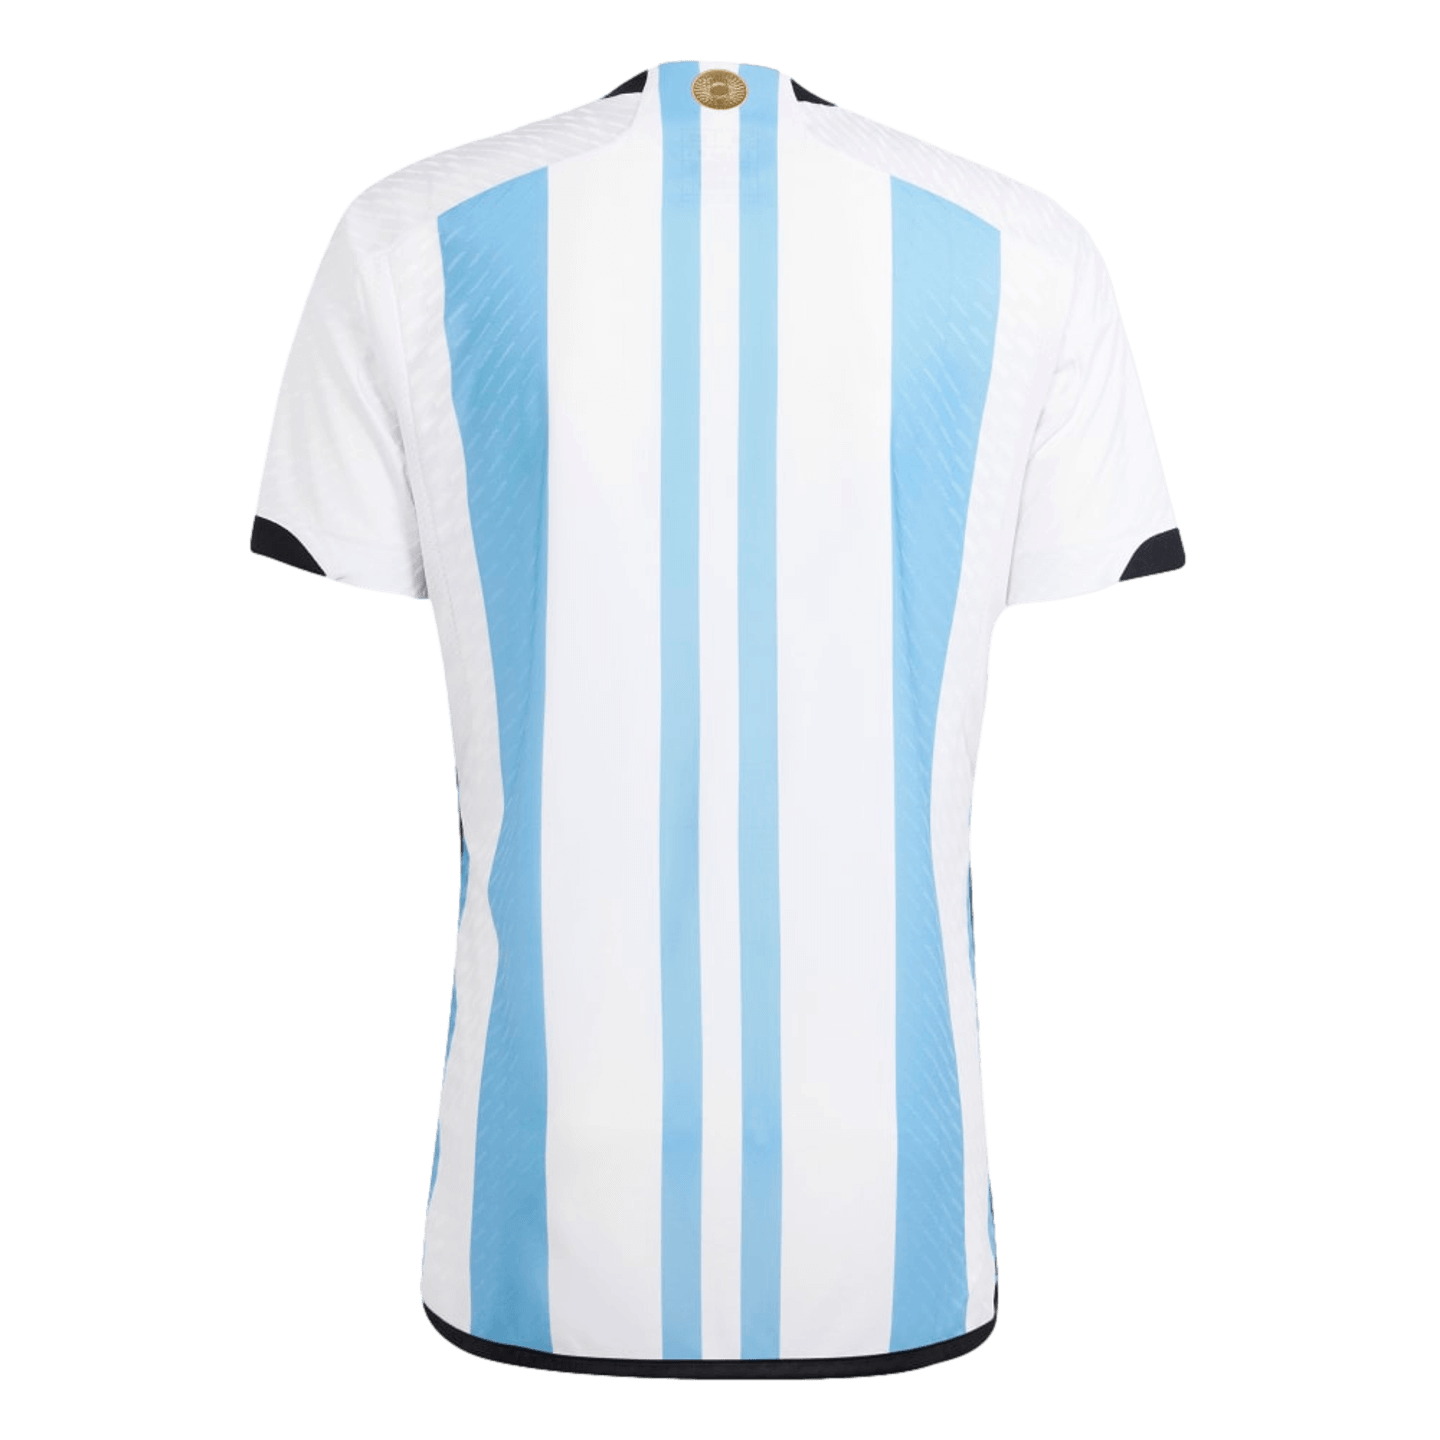 Adidas, Adidas Argentina 2022 3 Star Authentic Home Jersey